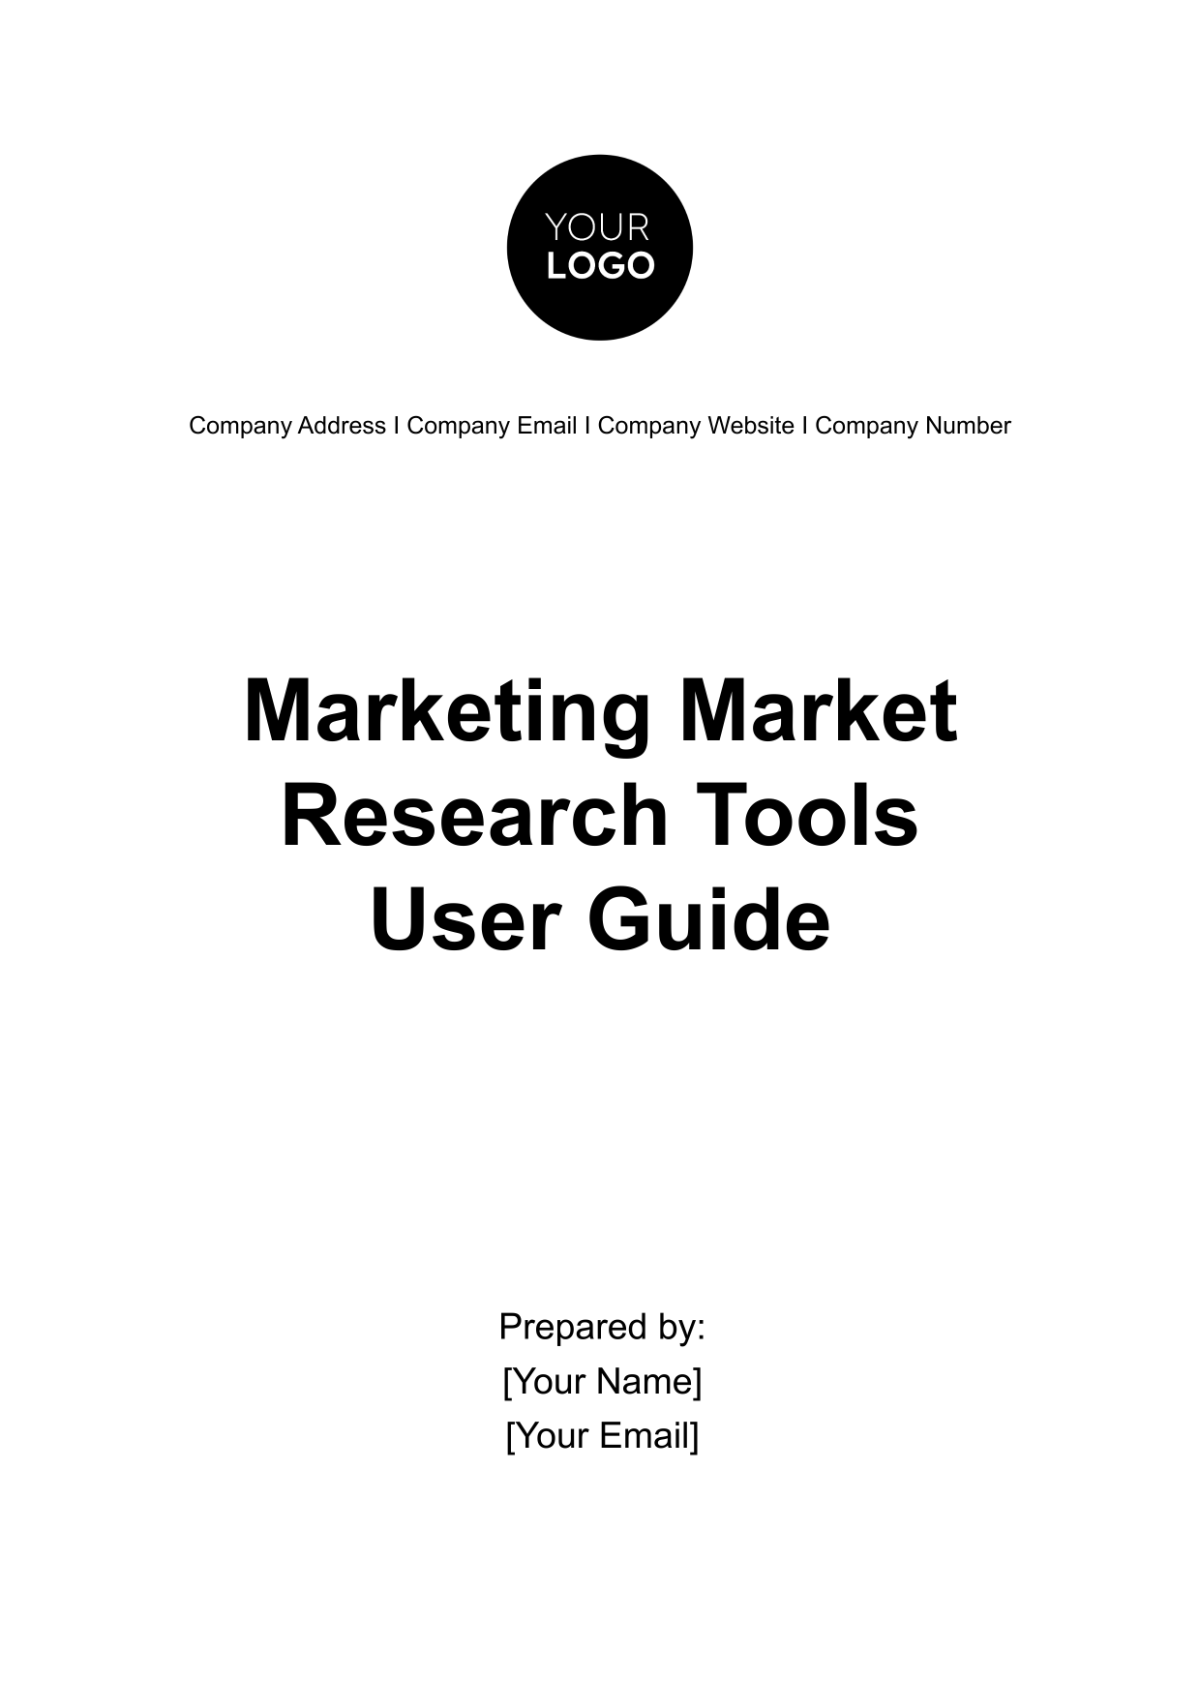 Marketing Market Research Tools User Guide Template